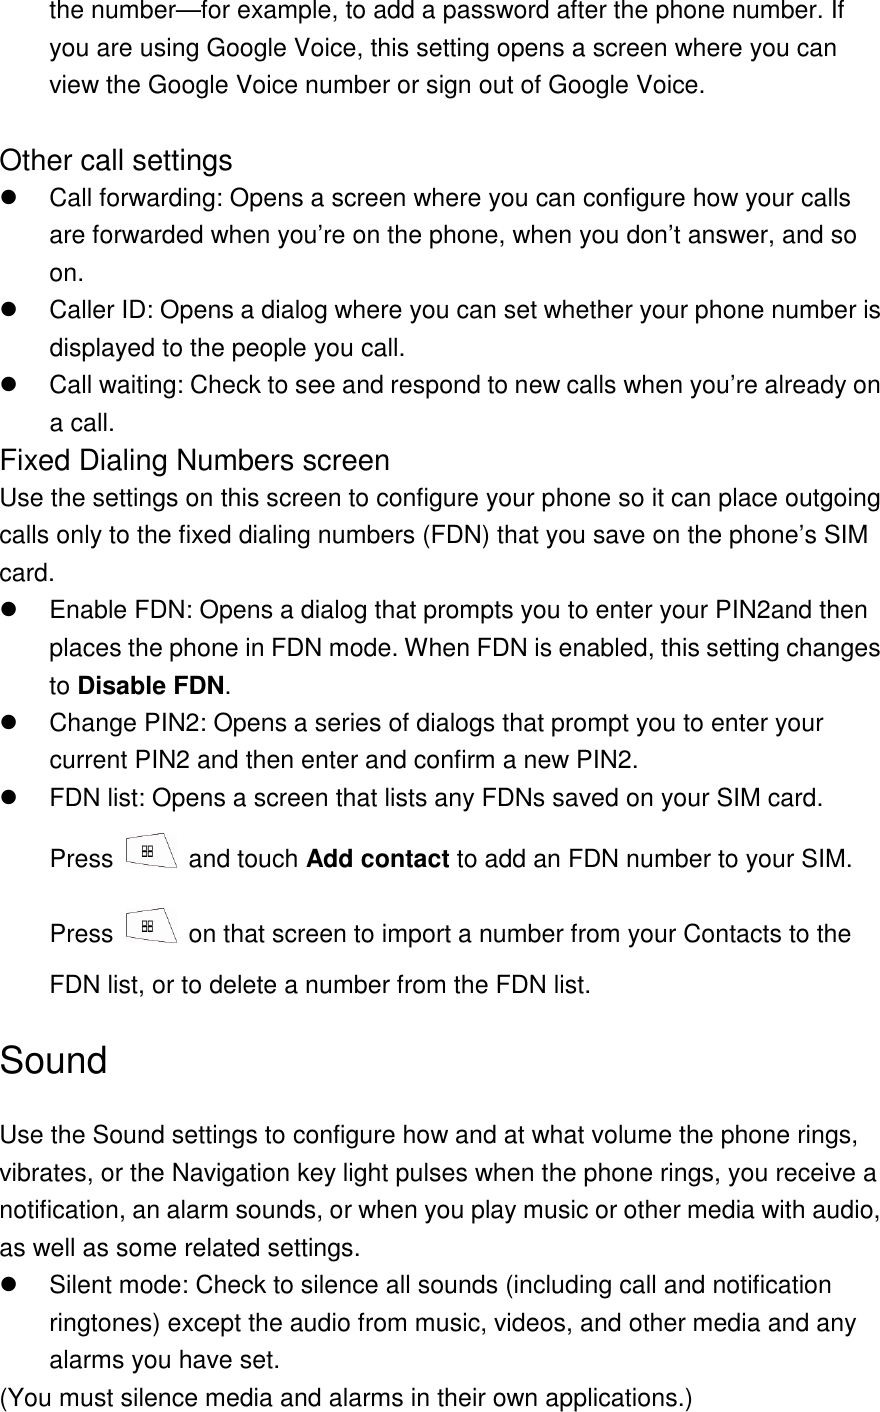 the number—for example, to add a password after the phone number. If you are using Google Voice, this setting opens a screen where you can view the Google Voice number or sign out of Google Voice.    Other call settings   Call forwarding: Opens a screen where you can configure how your calls are forwarded when you’re on the phone, when you don’t answer, and so on.   Caller ID: Opens a dialog where you can set whether your phone number is displayed to the people you call.   Call waiting: Check to see and respond to new calls when you’re already on a call. Fixed Dialing Numbers screen Use the settings on this screen to configure your phone so it can place outgoing calls only to the fixed dialing numbers (FDN) that you save on the phone’s SIM card.     Enable FDN: Opens a dialog that prompts you to enter your PIN2and then places the phone in FDN mode. When FDN is enabled, this setting changes to Disable FDN.   Change PIN2: Opens a series of dialogs that prompt you to enter your current PIN2 and then enter and confirm a new PIN2.   FDN list: Opens a screen that lists any FDNs saved on your SIM card. Press   and touch Add contact to add an FDN number to your SIM. Press    on that screen to import a number from your Contacts to the FDN list, or to delete a number from the FDN list. Sound Use the Sound settings to configure how and at what volume the phone rings, vibrates, or the Navigation key light pulses when the phone rings, you receive a notification, an alarm sounds, or when you play music or other media with audio, as well as some related settings.   Silent mode: Check to silence all sounds (including call and notification ringtones) except the audio from music, videos, and other media and any alarms you have set. (You must silence media and alarms in their own applications.) 